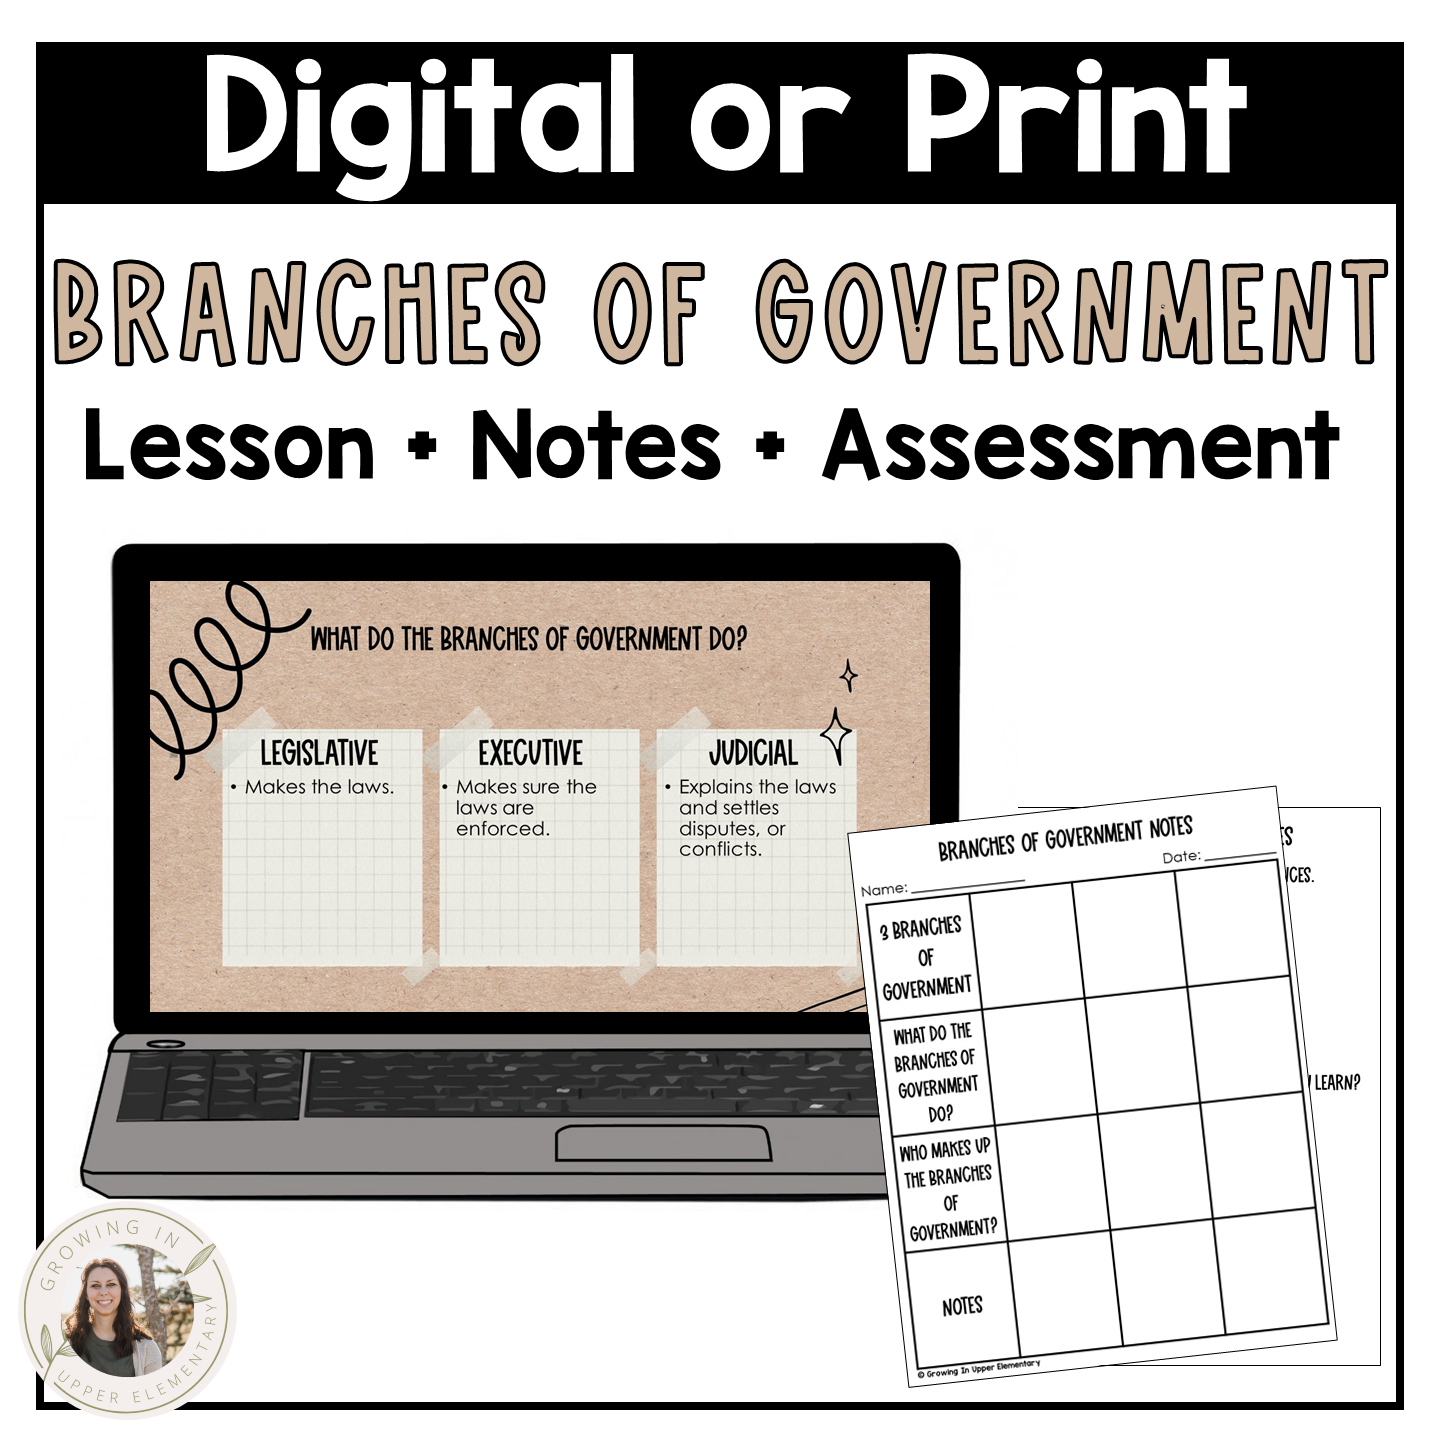 Three Branches of Government Lesson